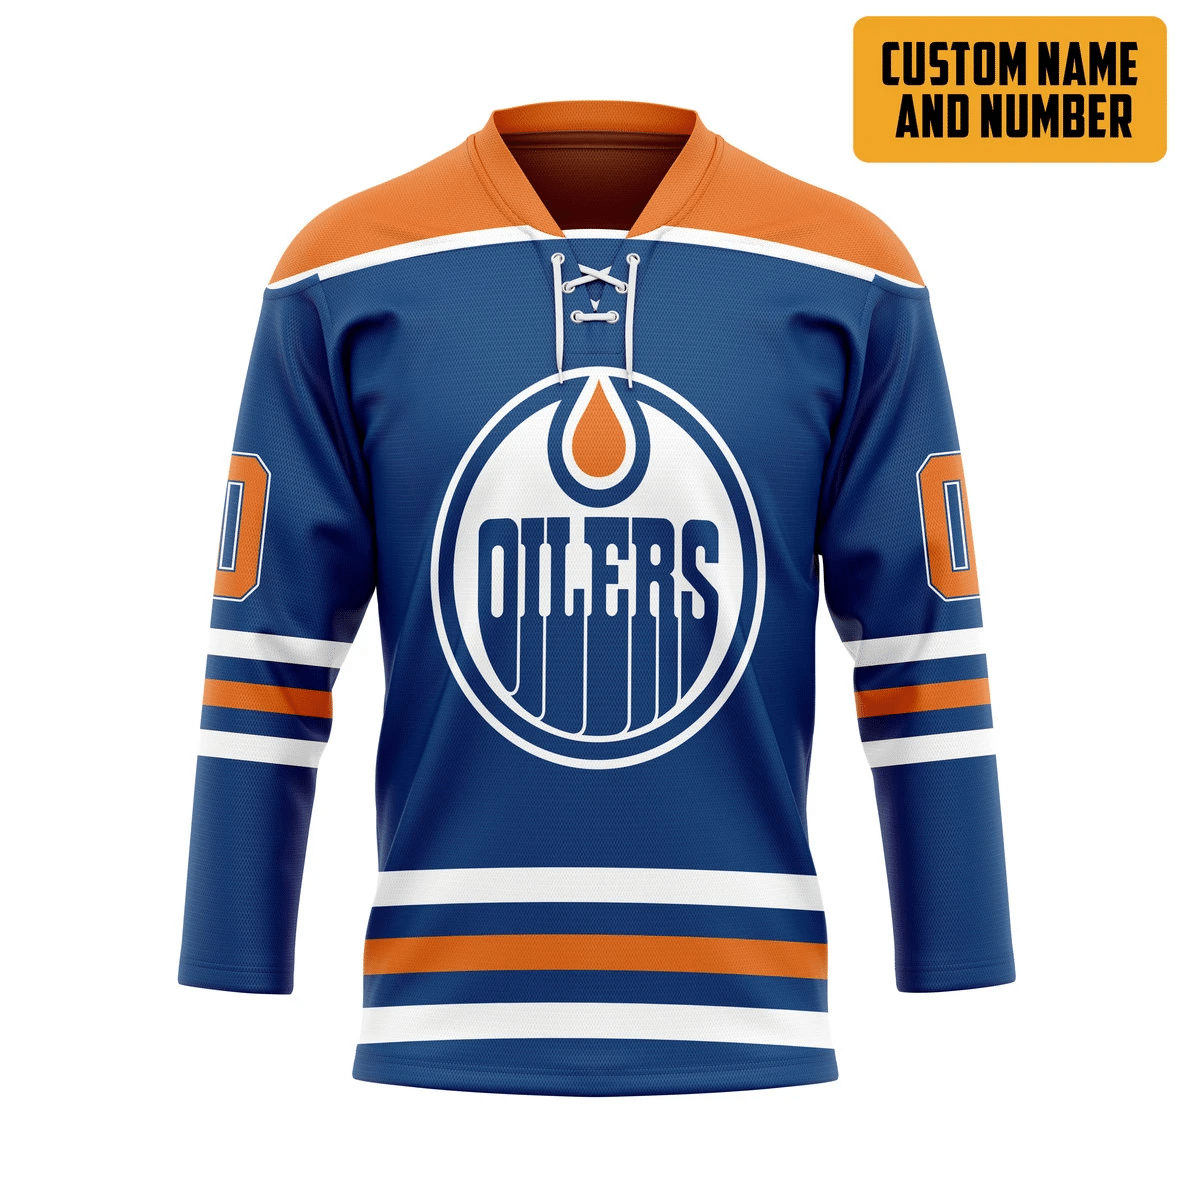 The hockey jersey is one of the most important items to have as a sports fan. 191